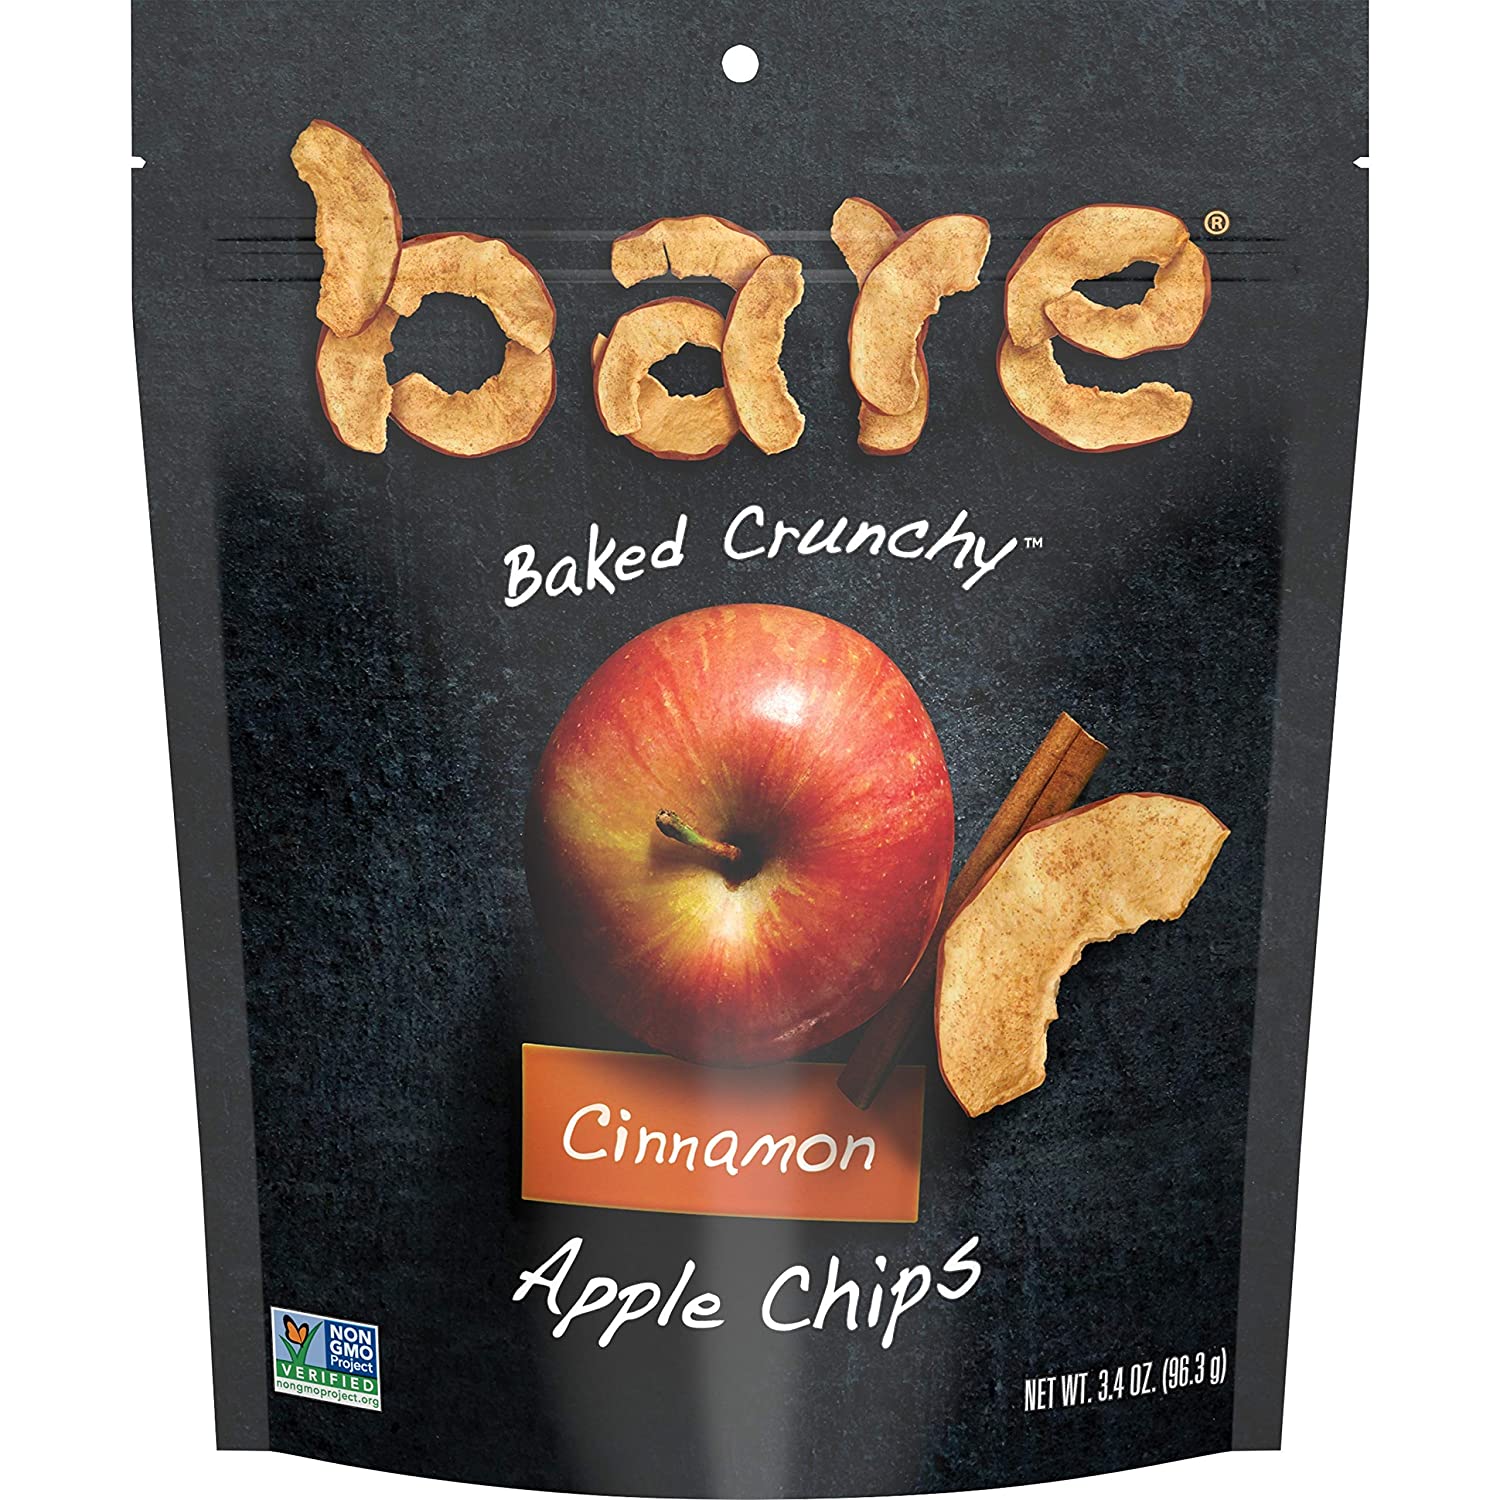 6-Count 3.4-Oz Bare Baked Crunchy Apple Chips (Cinnamon) $11.29 w/ S&S + Free Shipping w/ Prime or on $25+